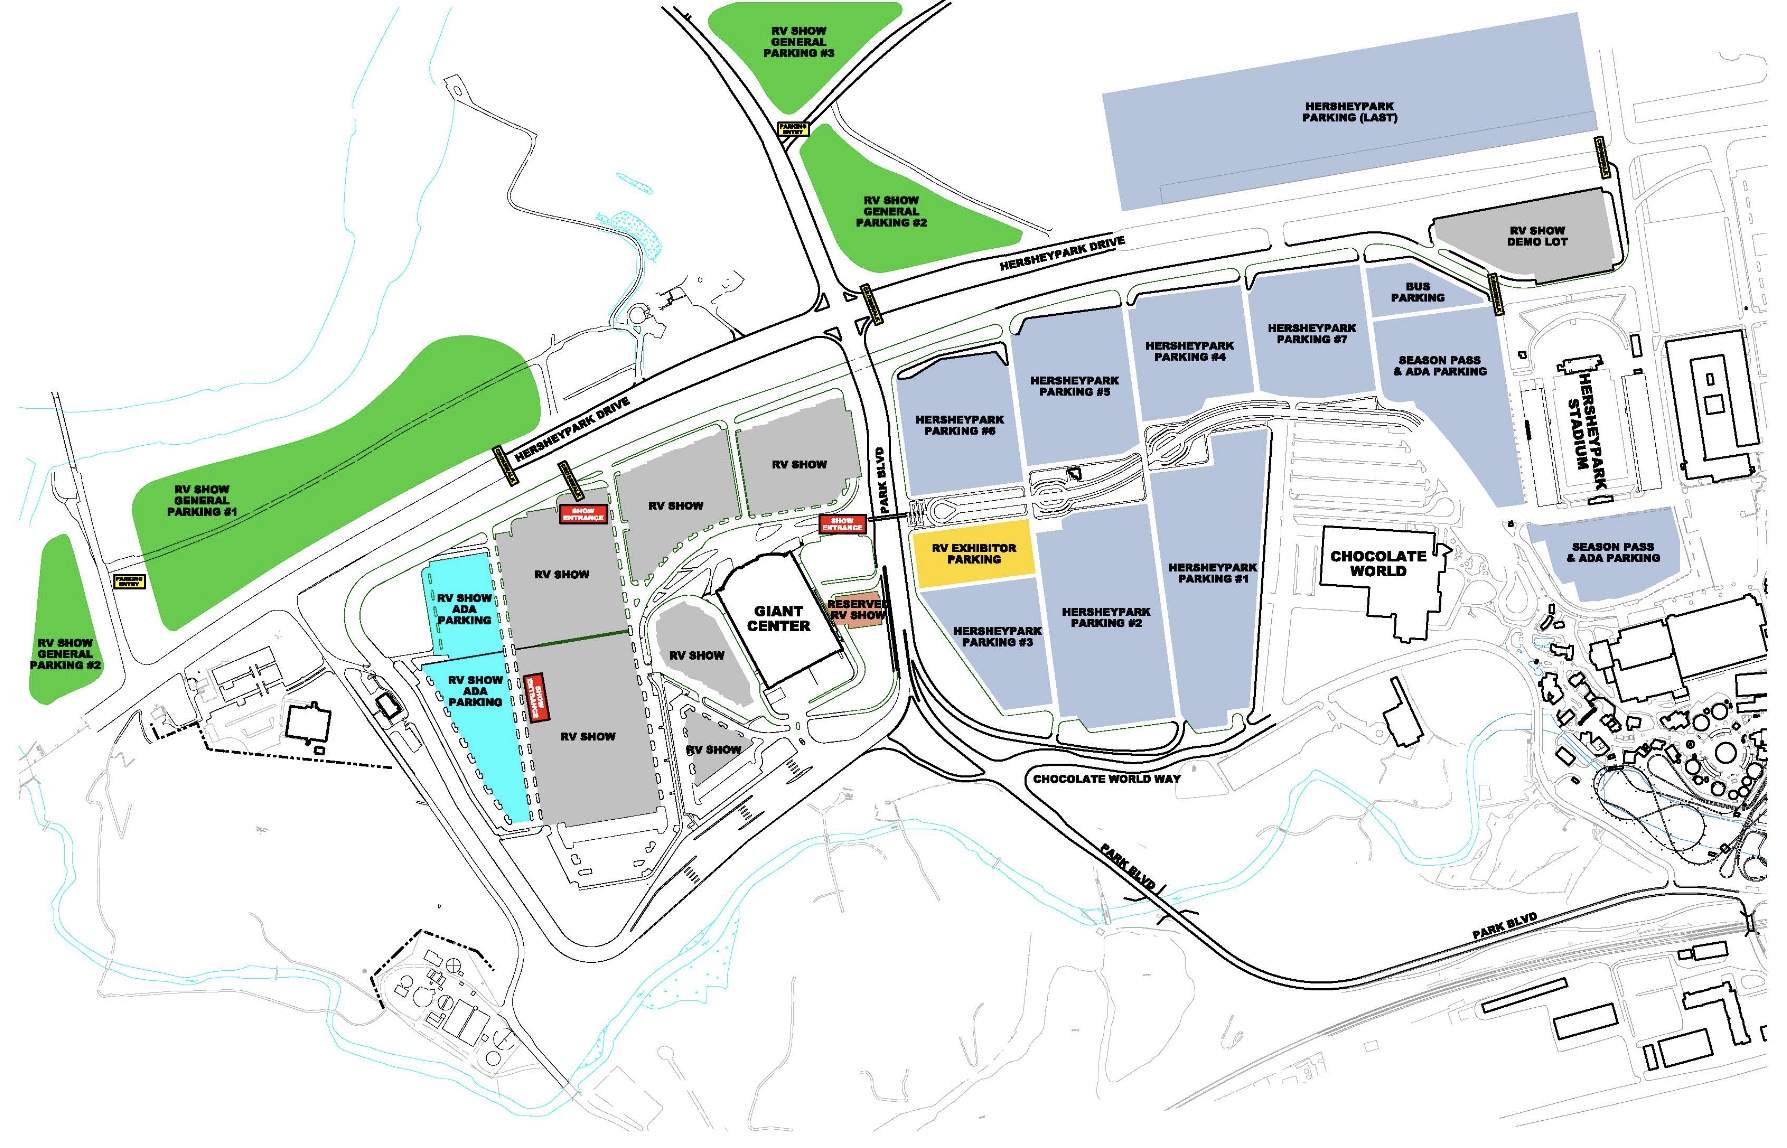 A map of the show area